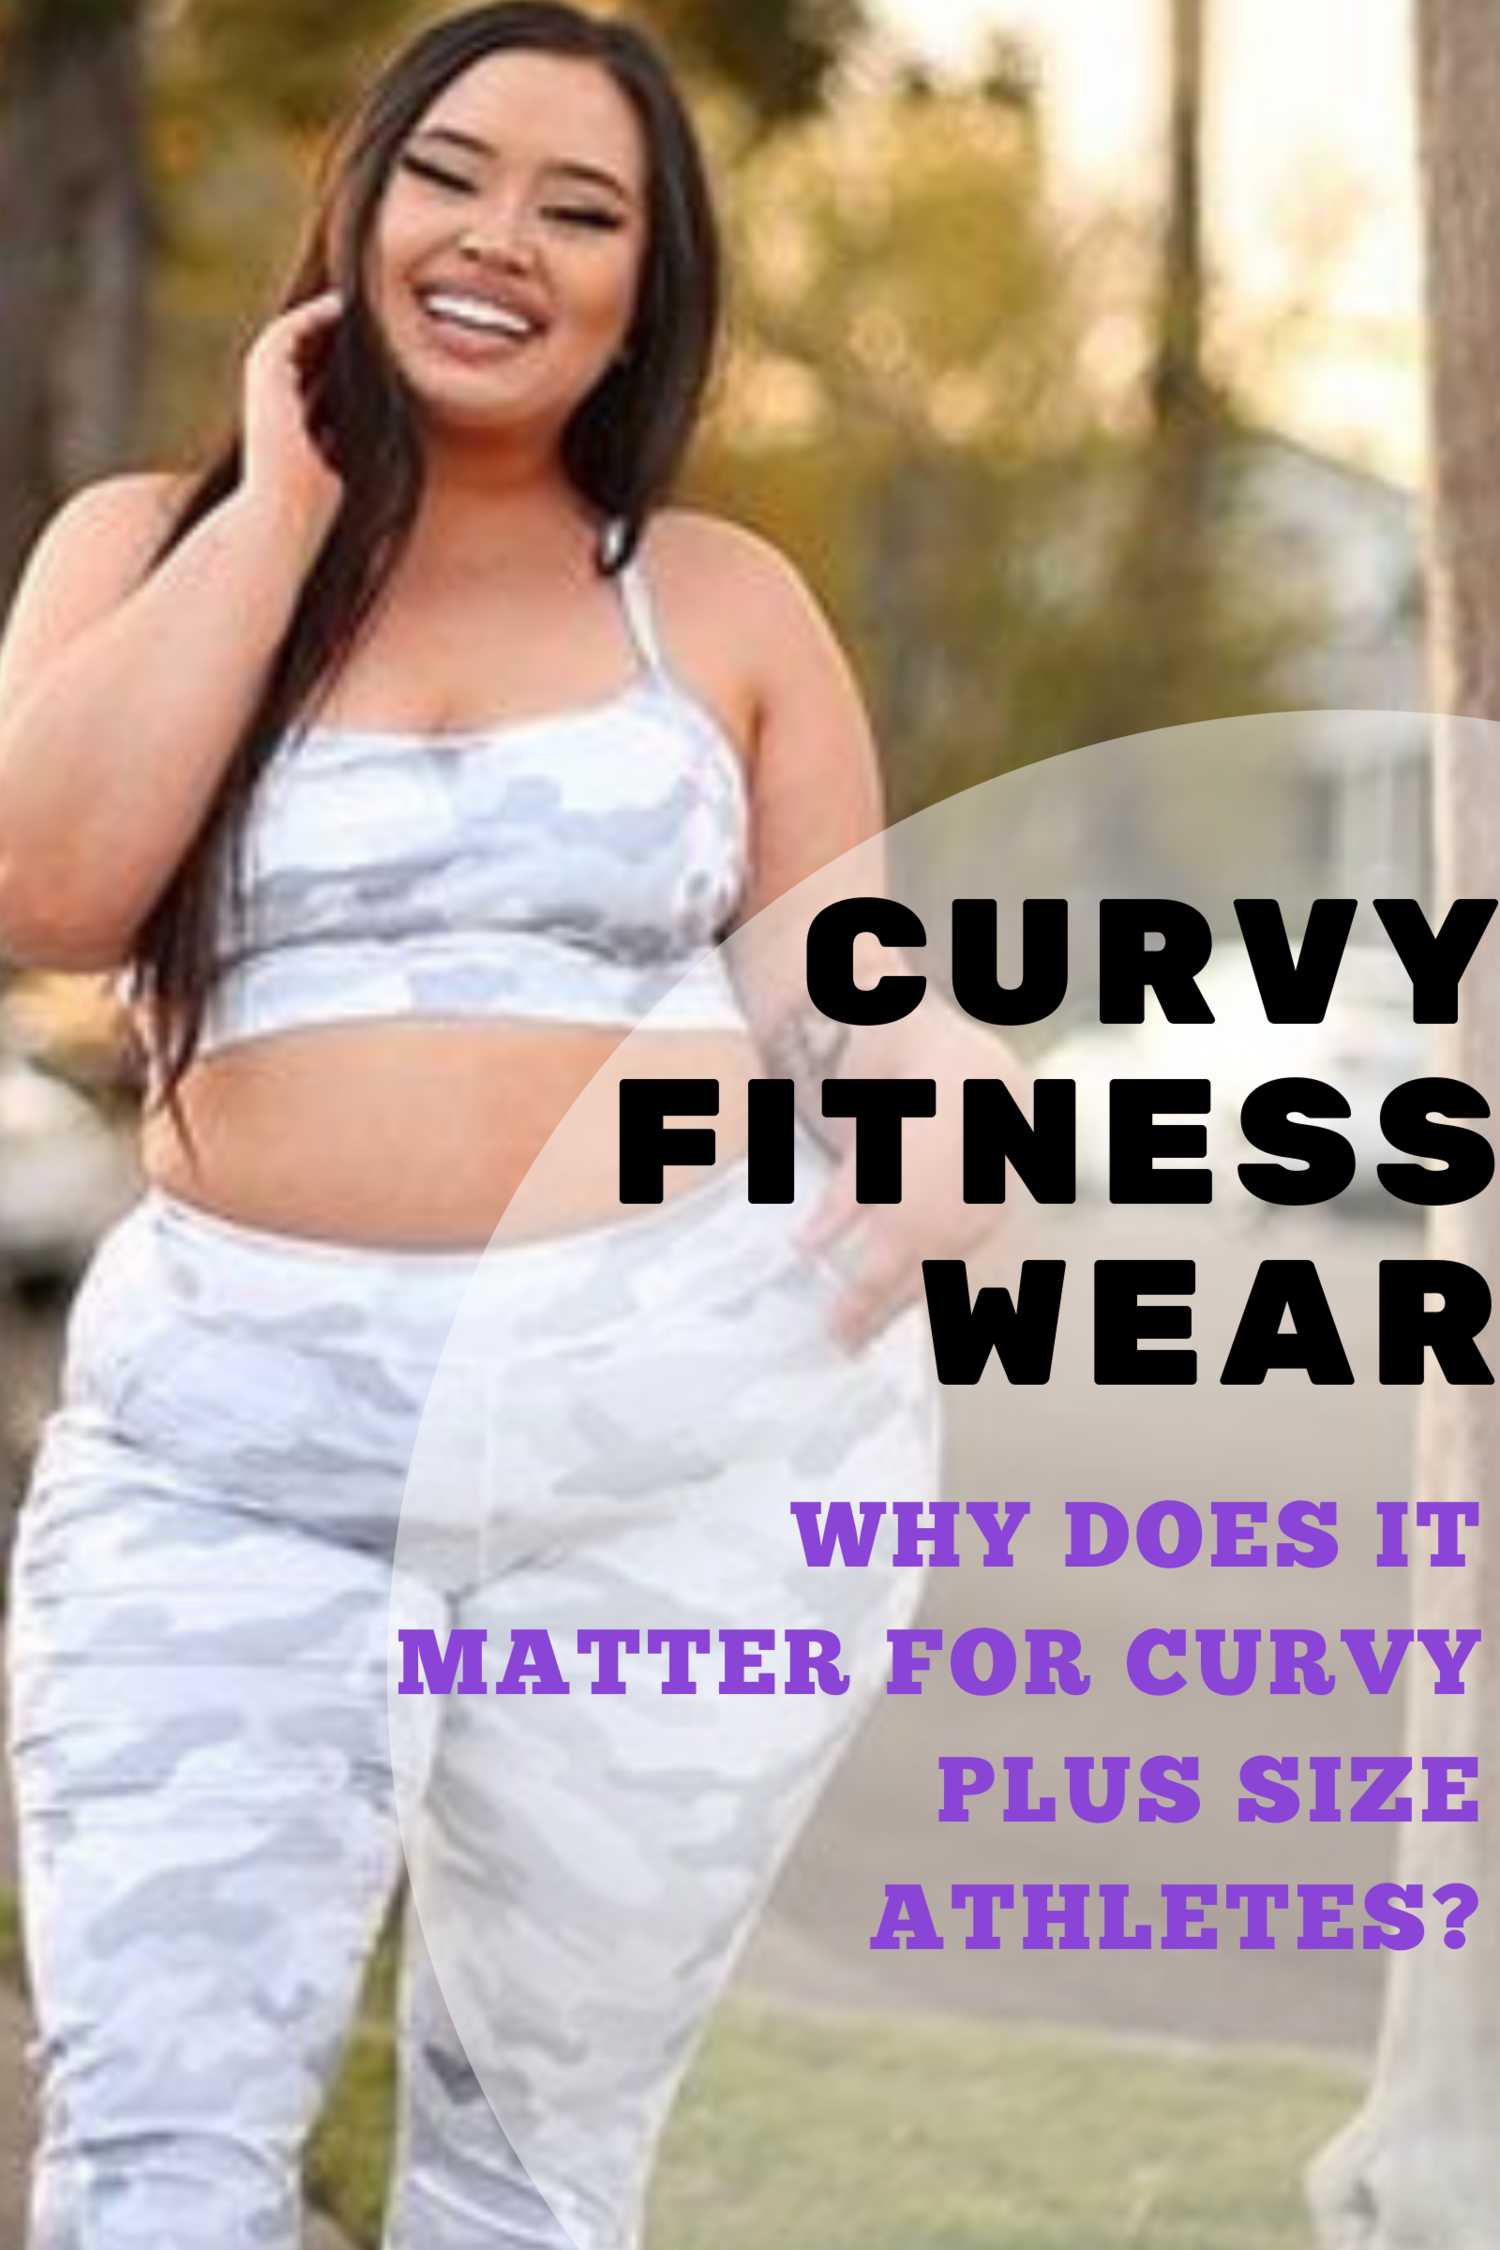 CurvyWordy - I'm definitely not up to doing any sports or physical